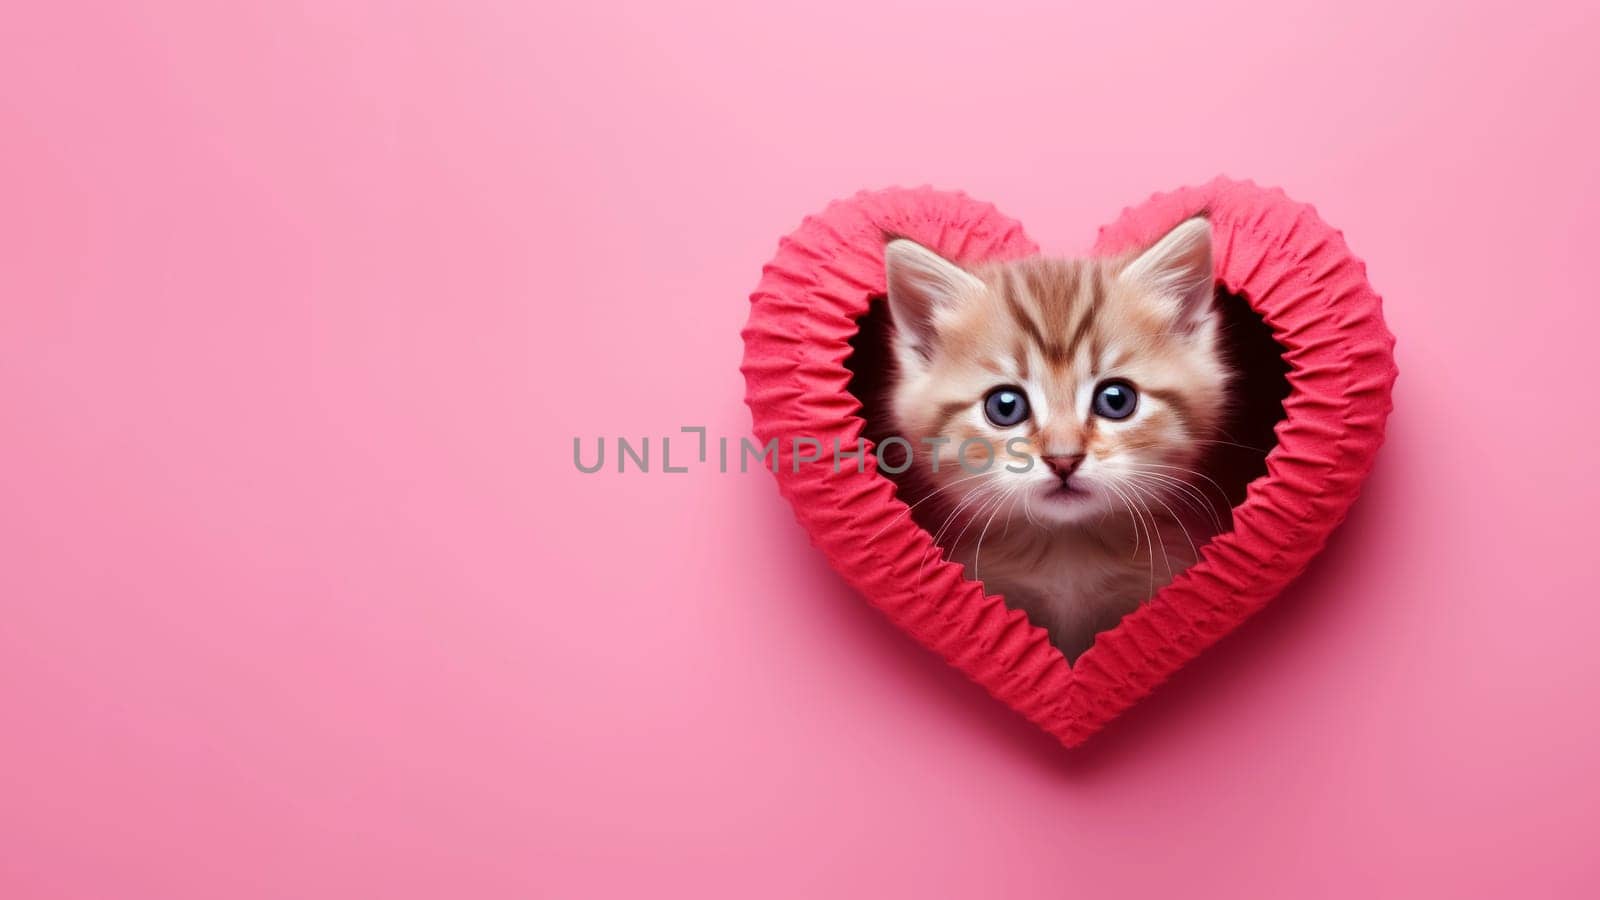 A cute and attractive kitten surrounded by a red heart on a pink background by andreyz